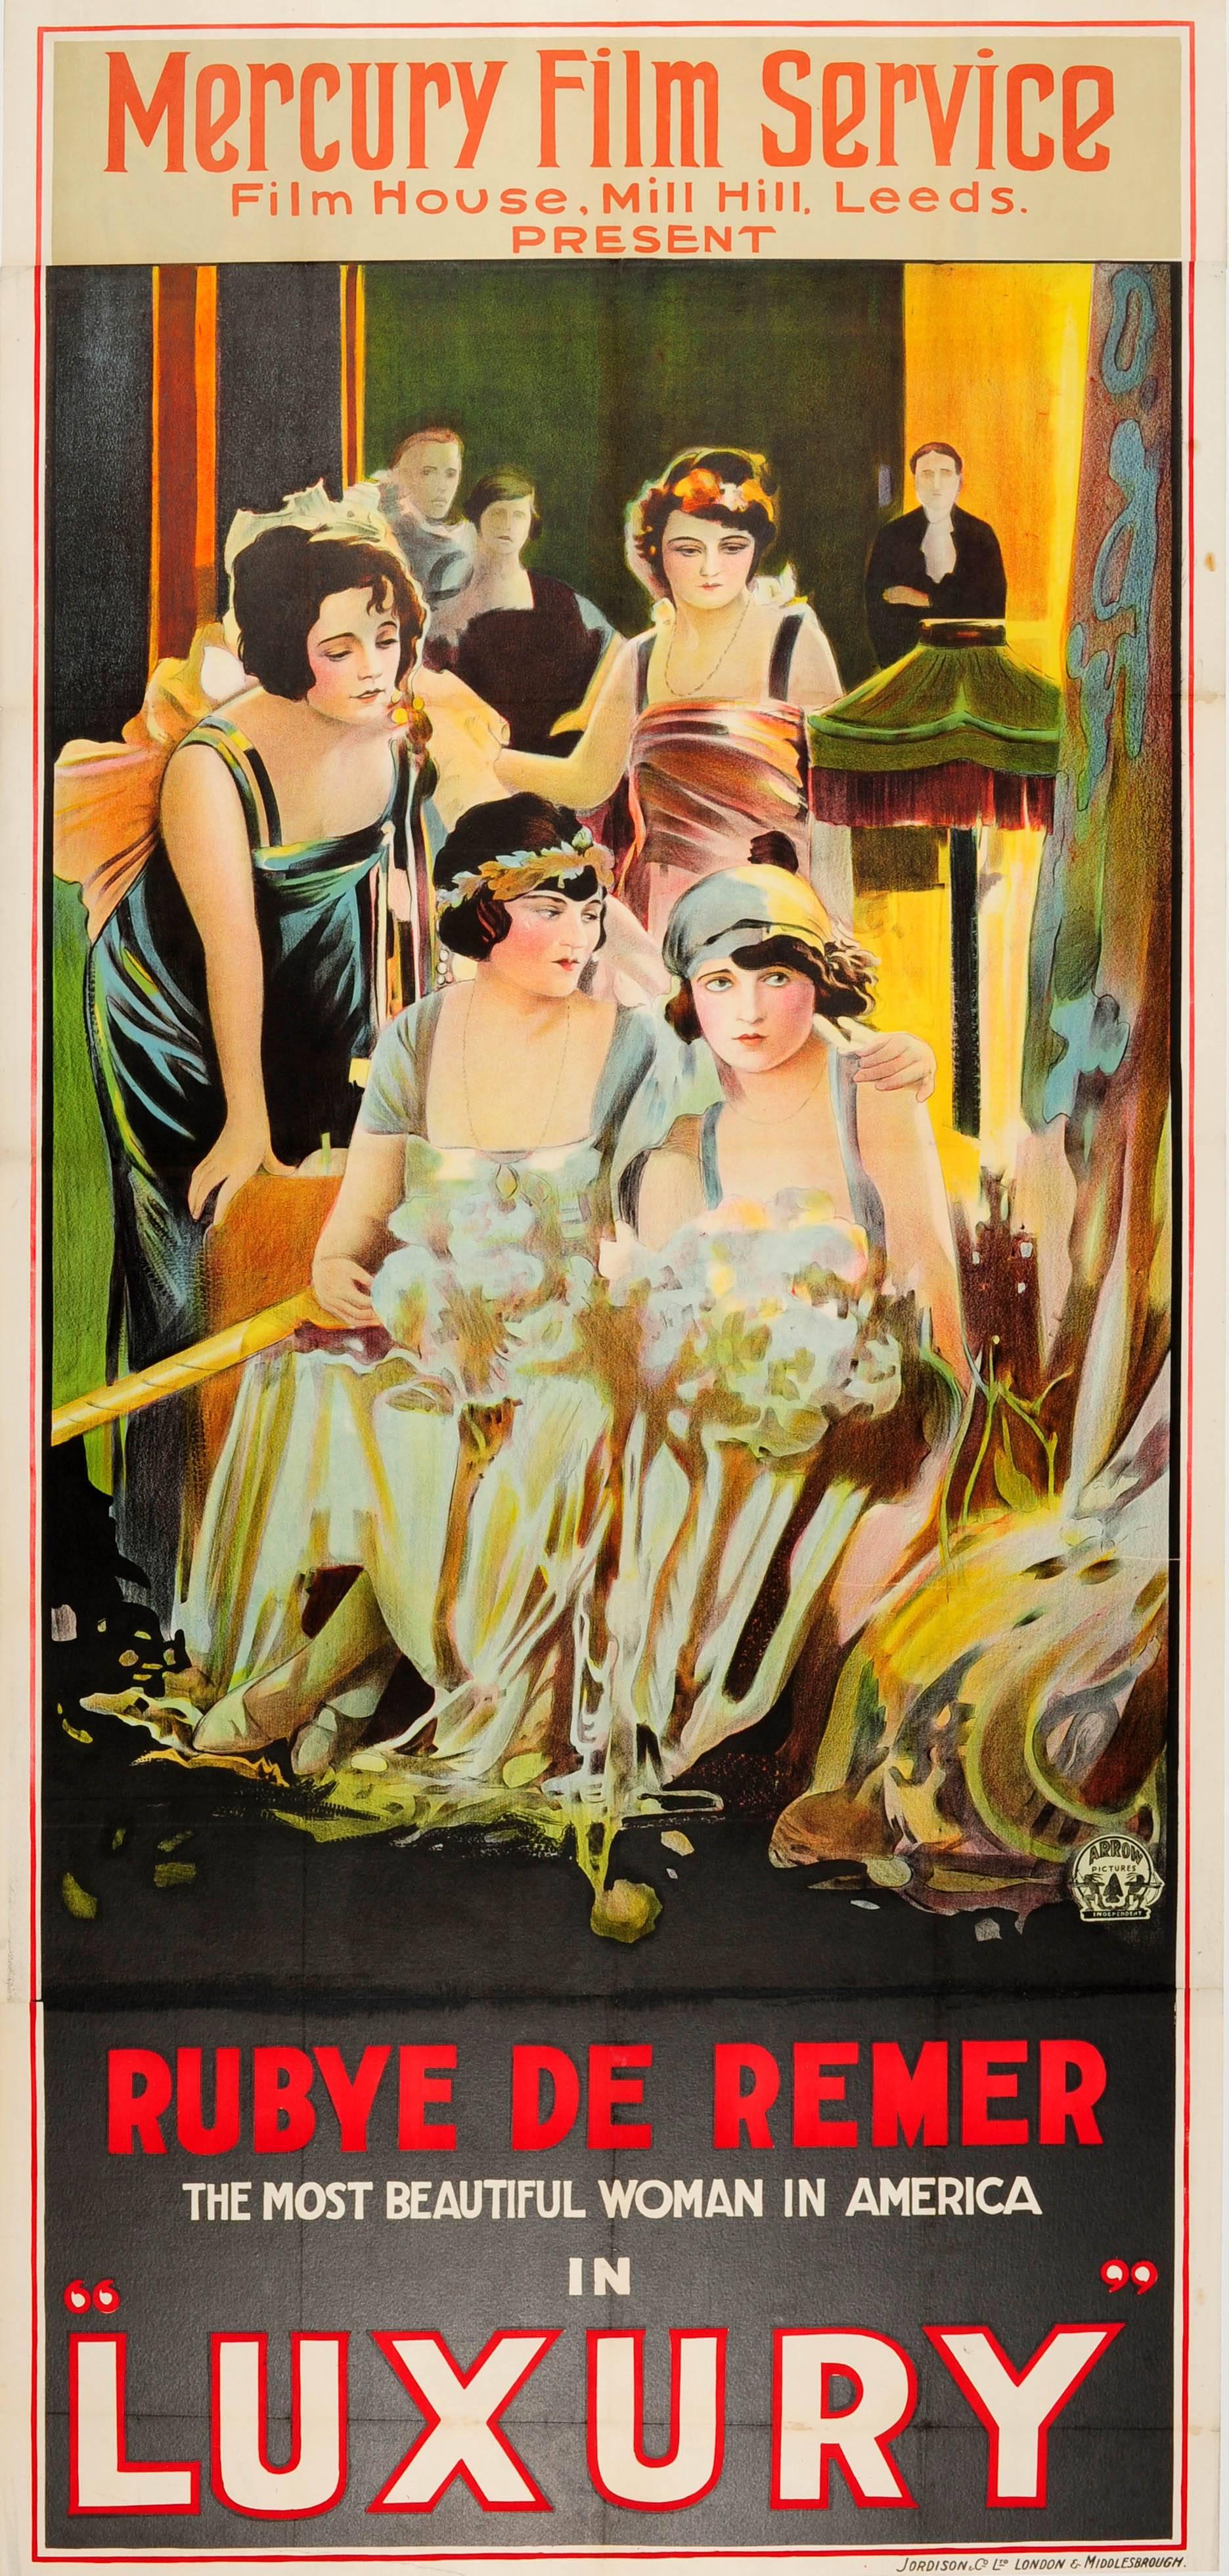 Unknown Print - Large Original Vintage Movie Poster For The Film Luxury Starring Rubye De Remer